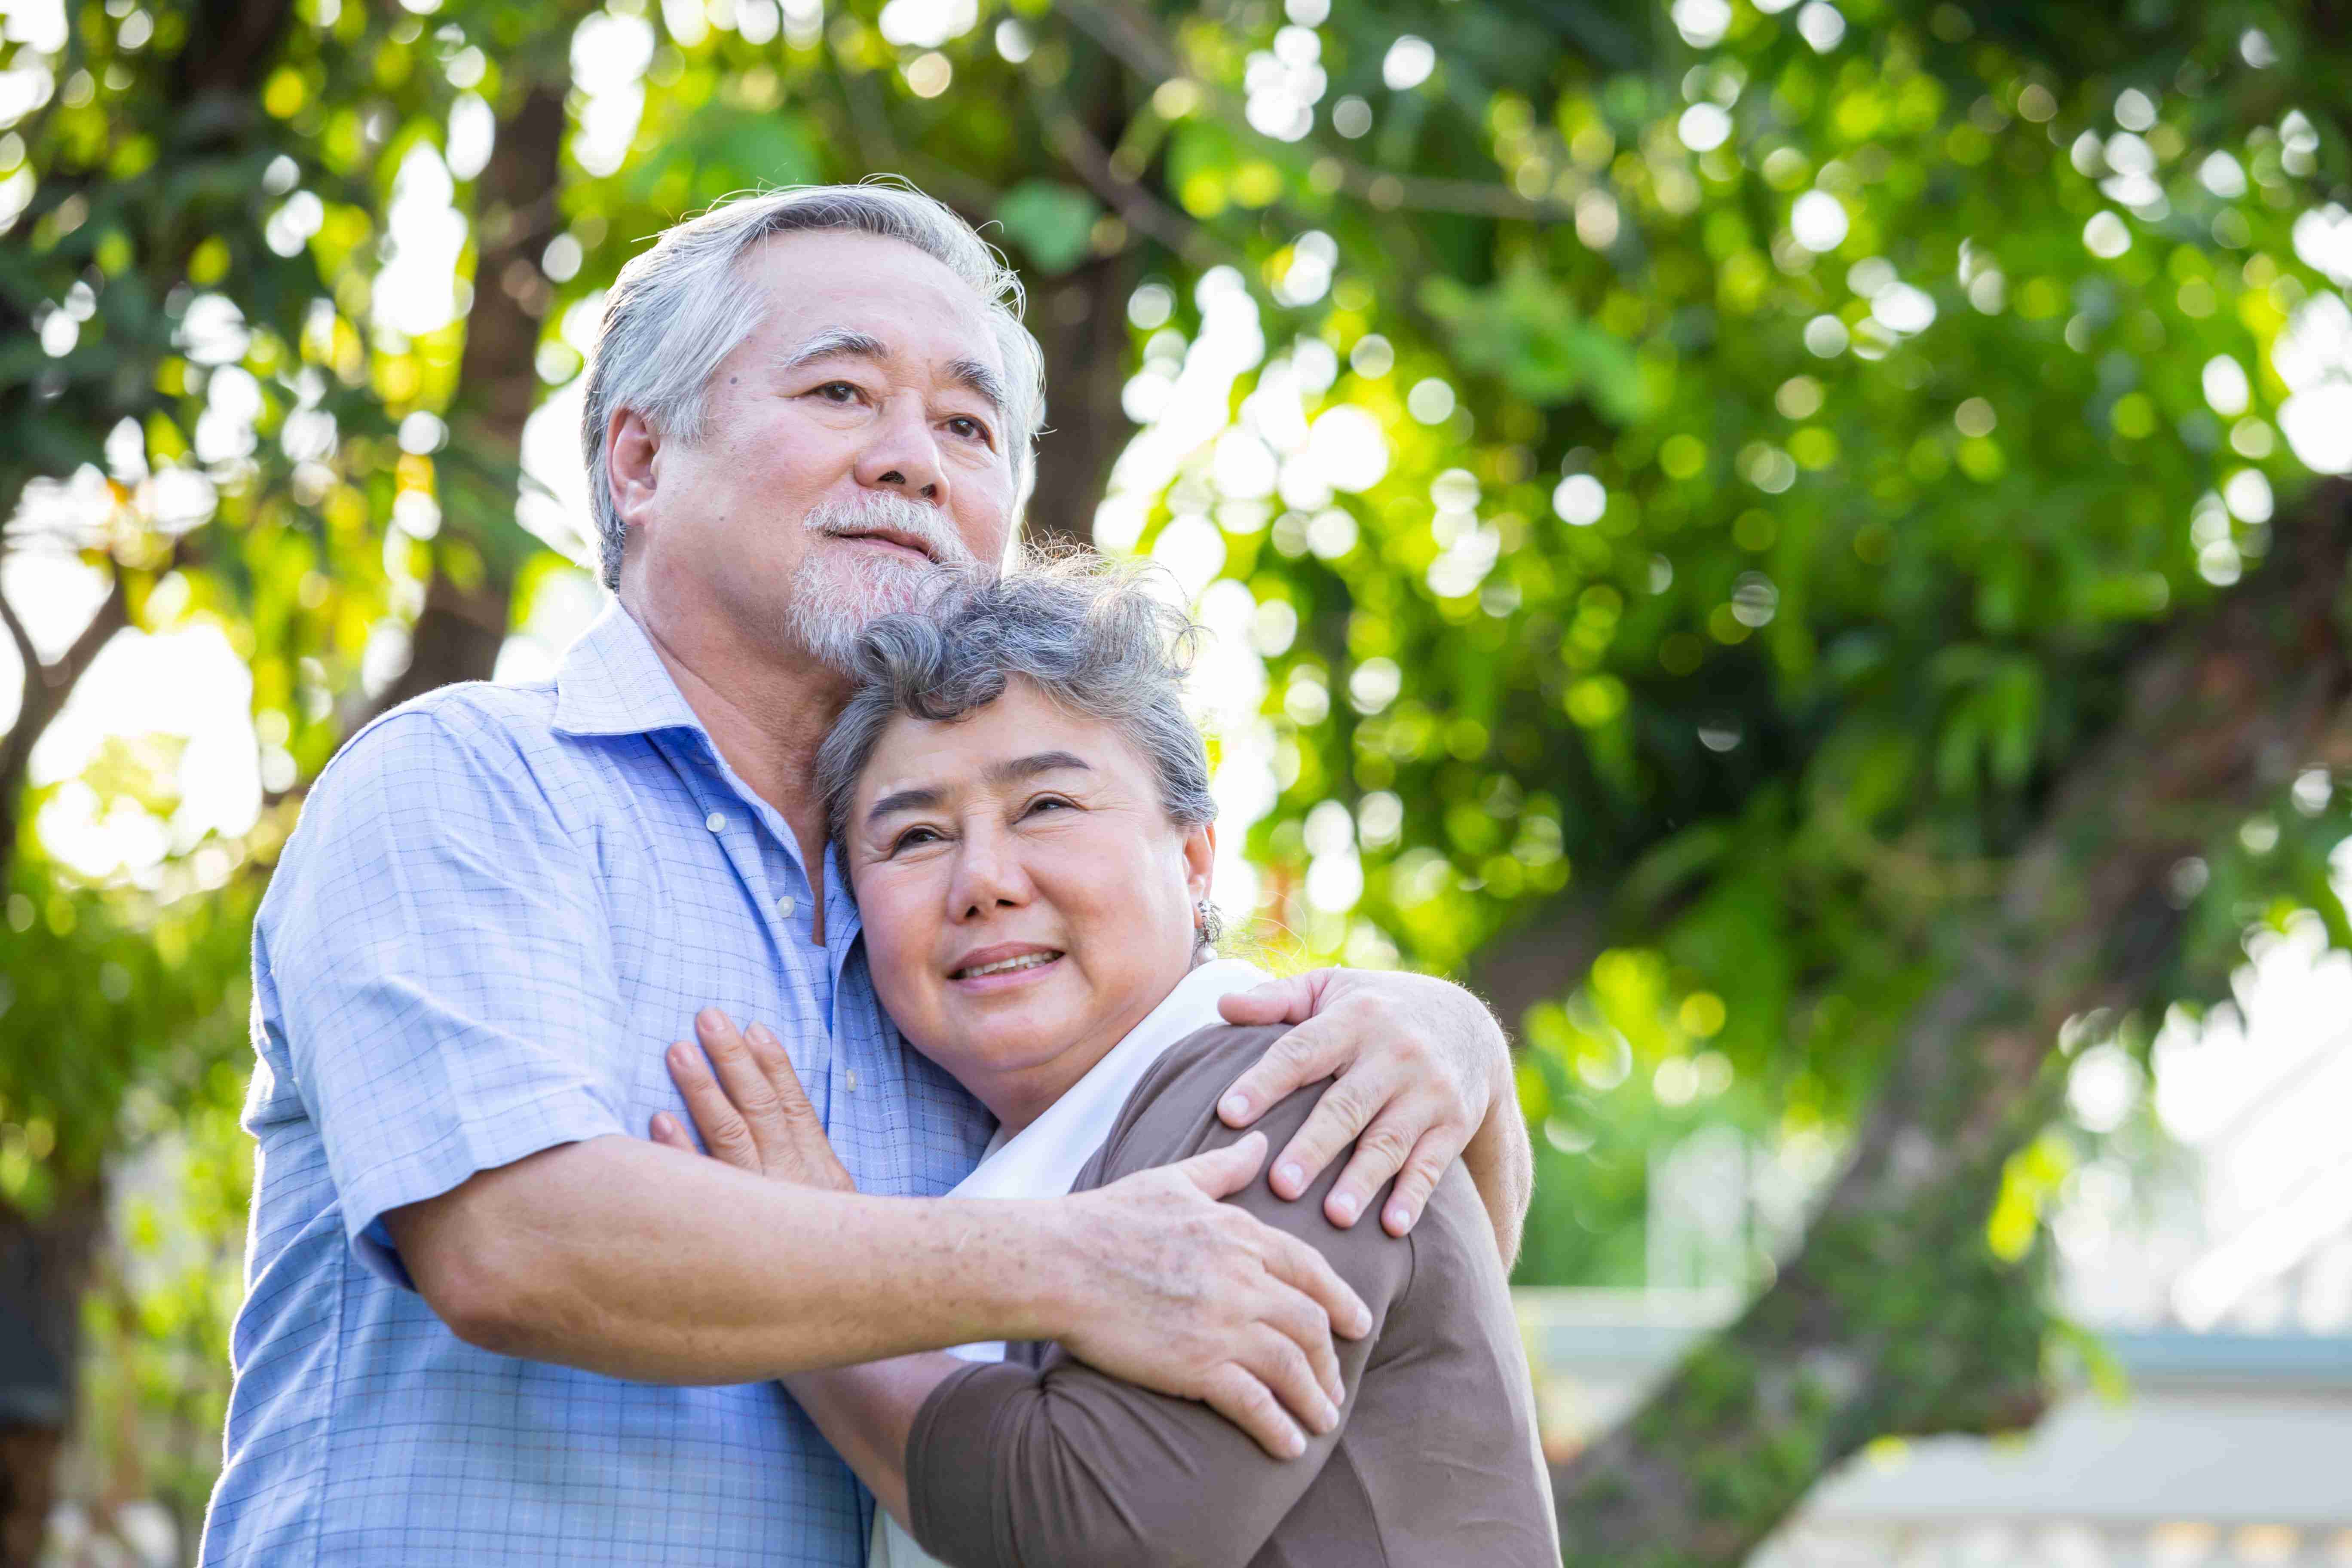 Elderly man embracing wife in the outdoors